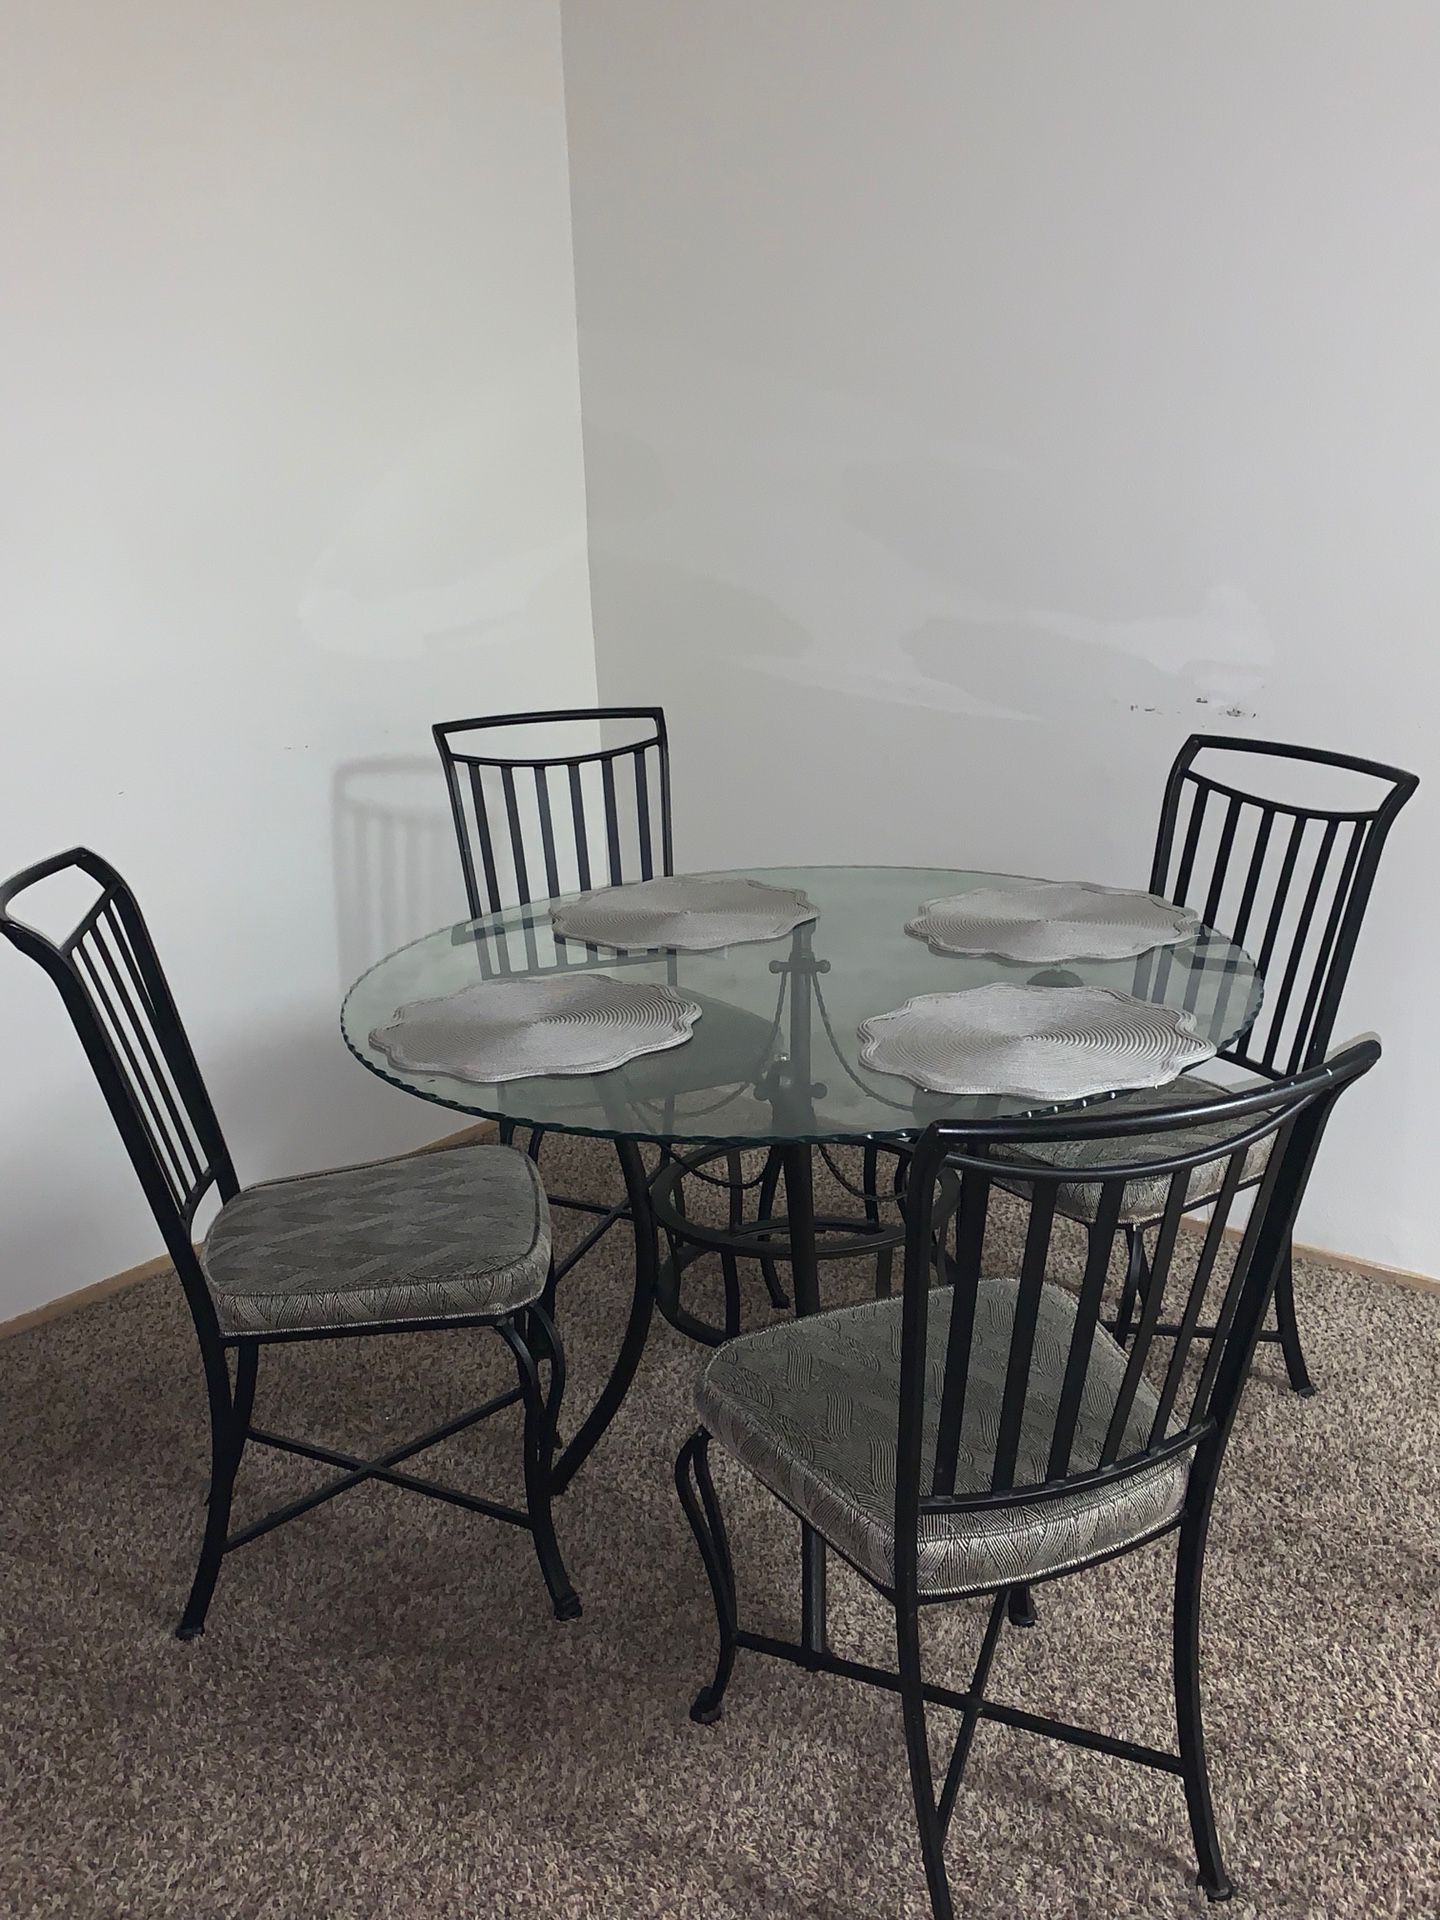 Dining table sets(chairs included)